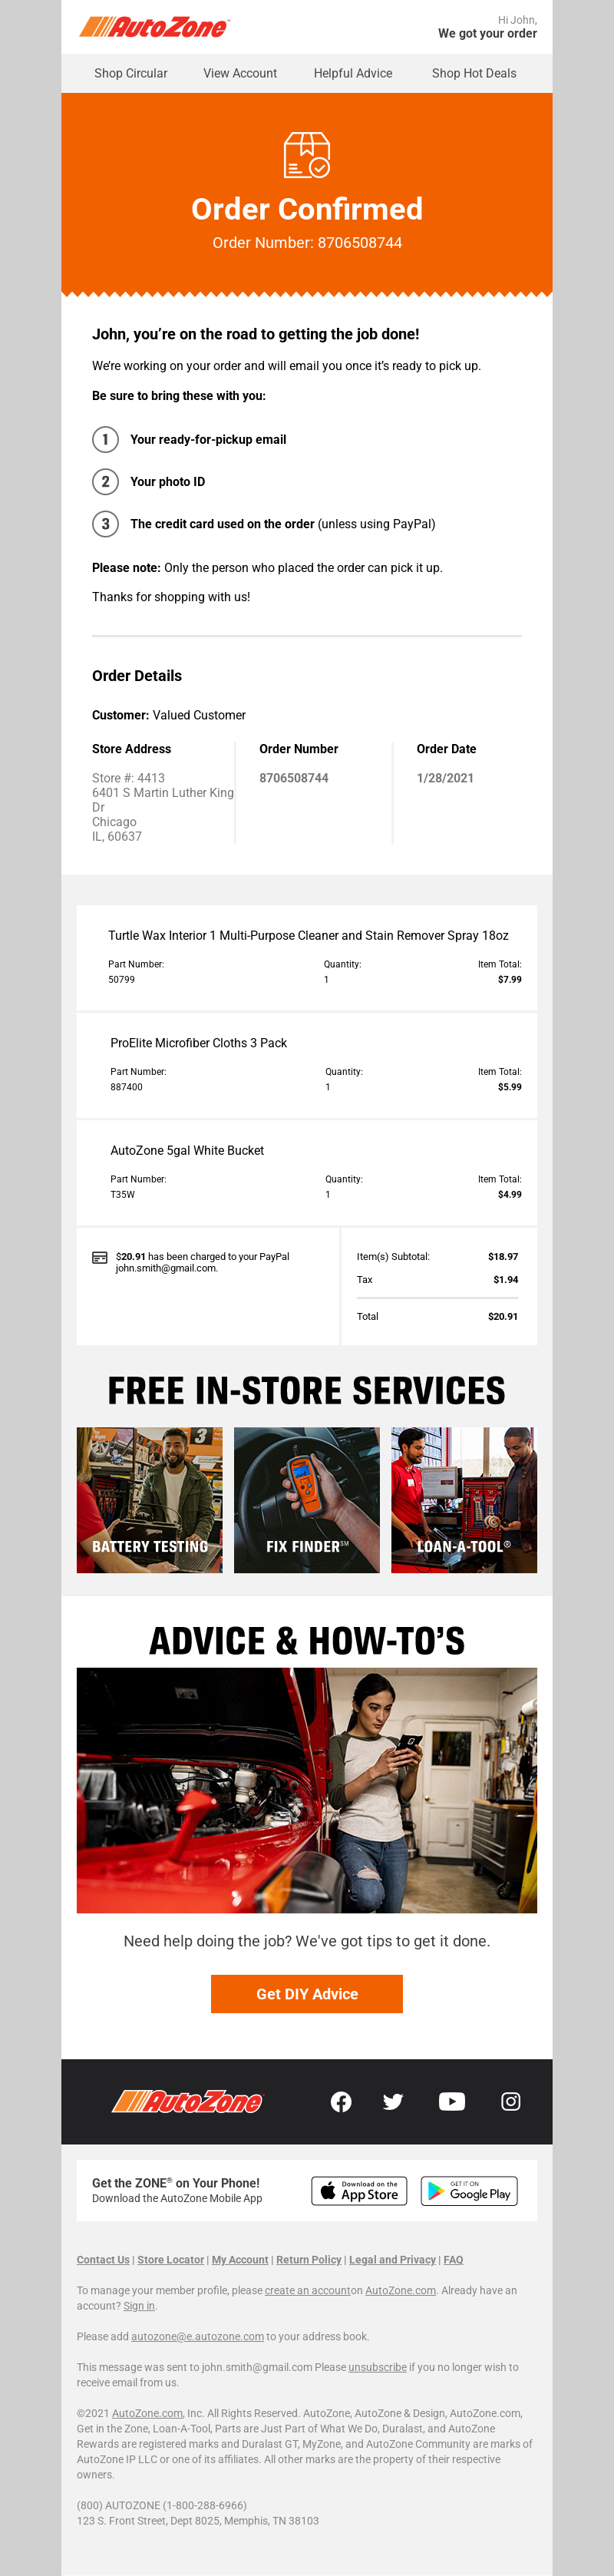 AutoZone Order Confirmation Email Template screenshot